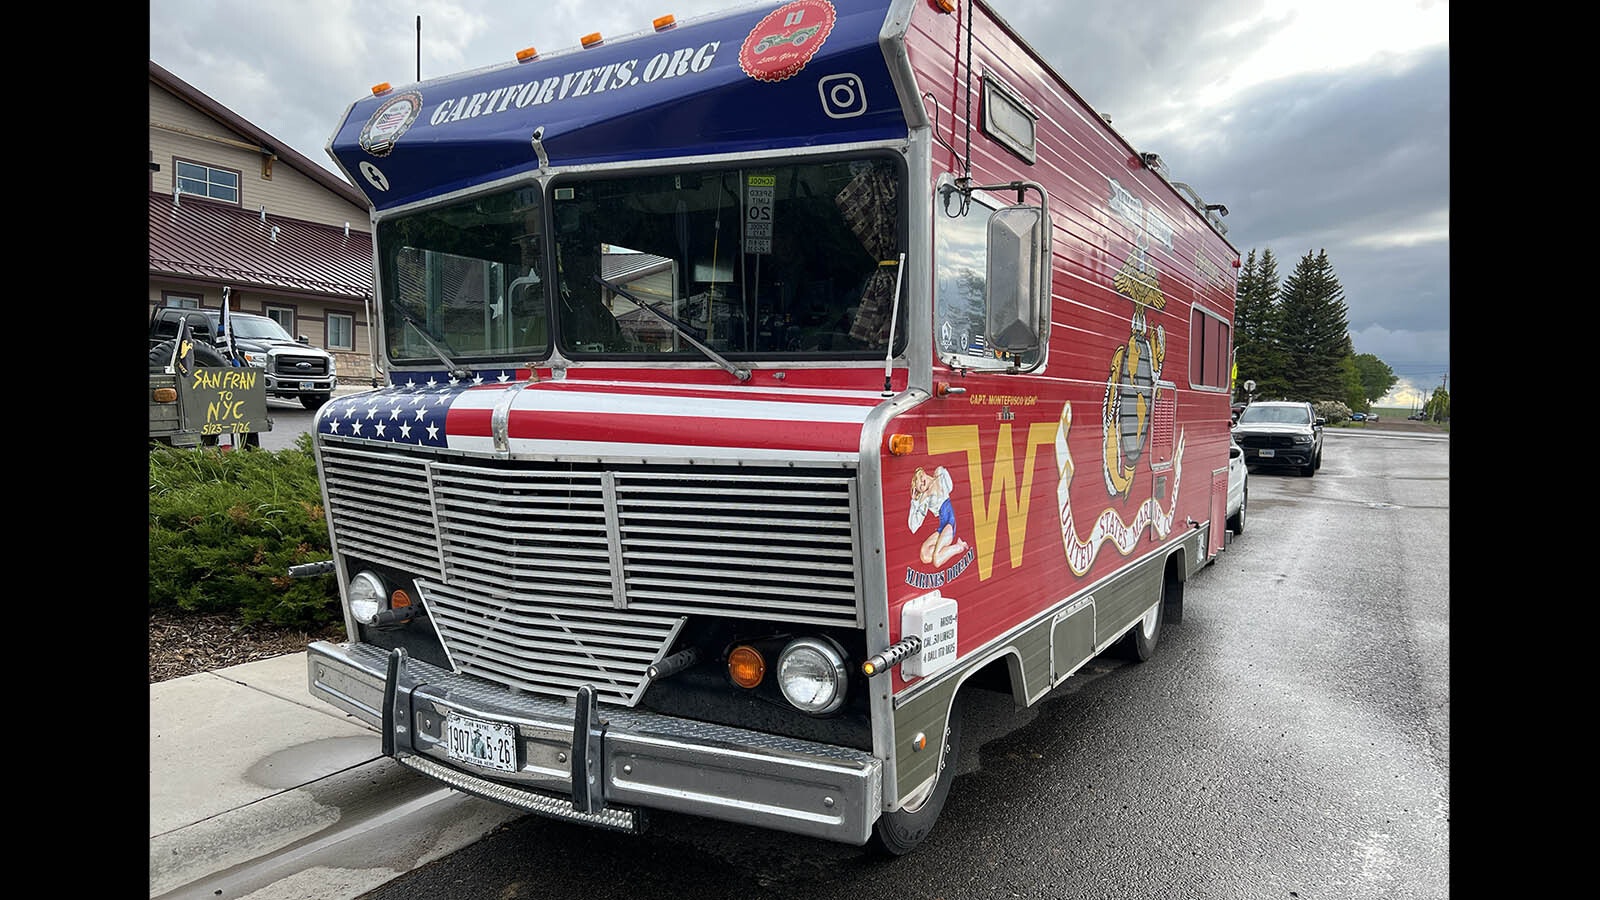 This 1973 Winnebago Brave is a rolling advertisement for the Marines and Scott Montefusco's GART For Vets organization.